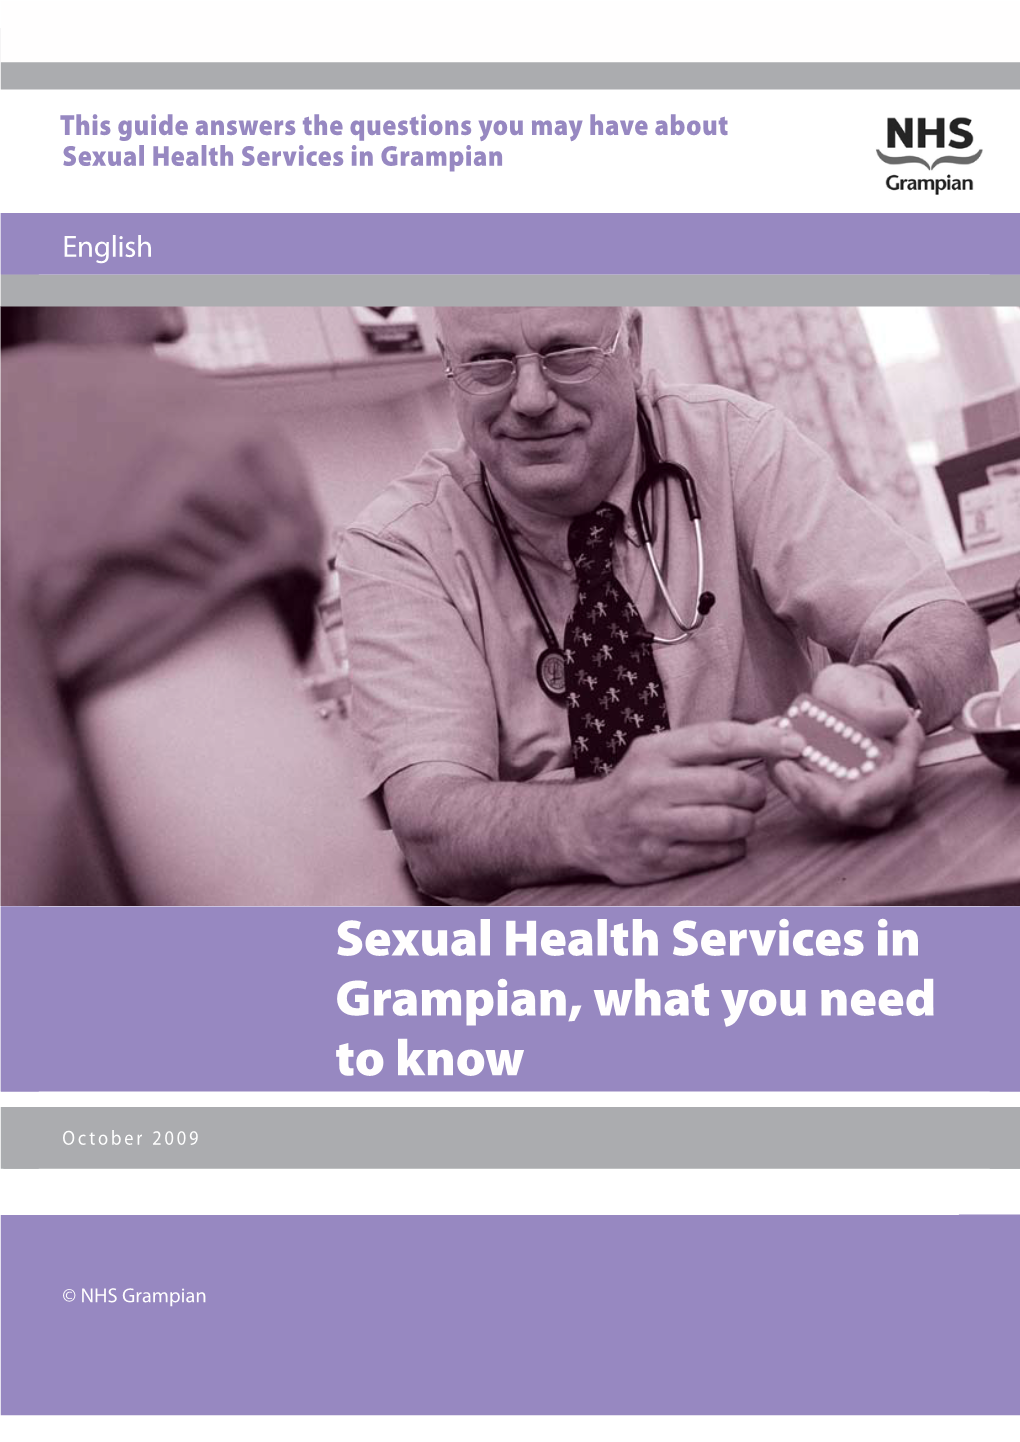 Sexual Health Services in Grampian, What You Need to Know